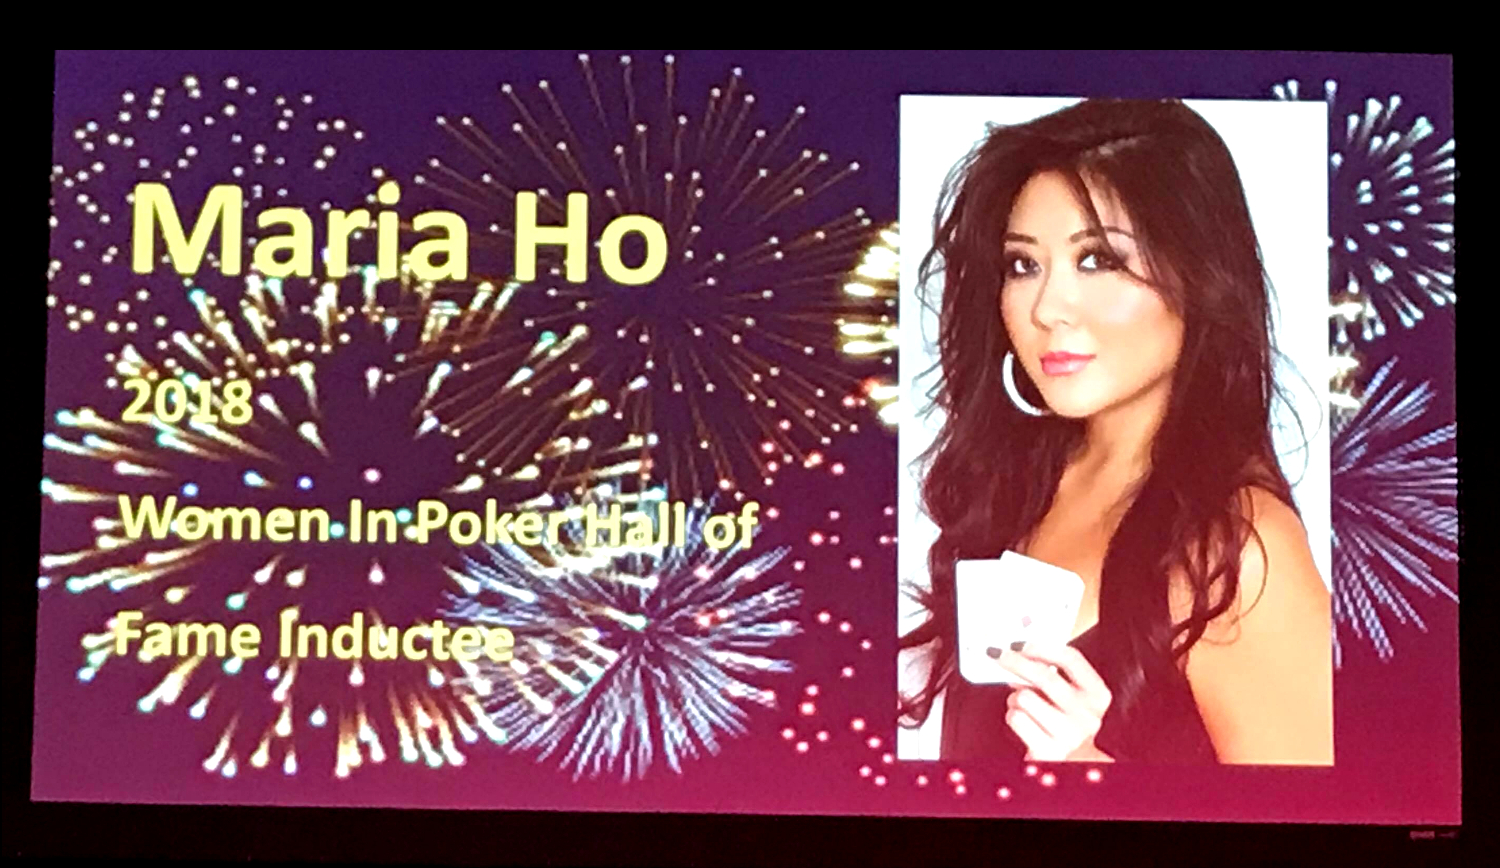 Maria Ho Inducted into Women In Poker Hall of fame